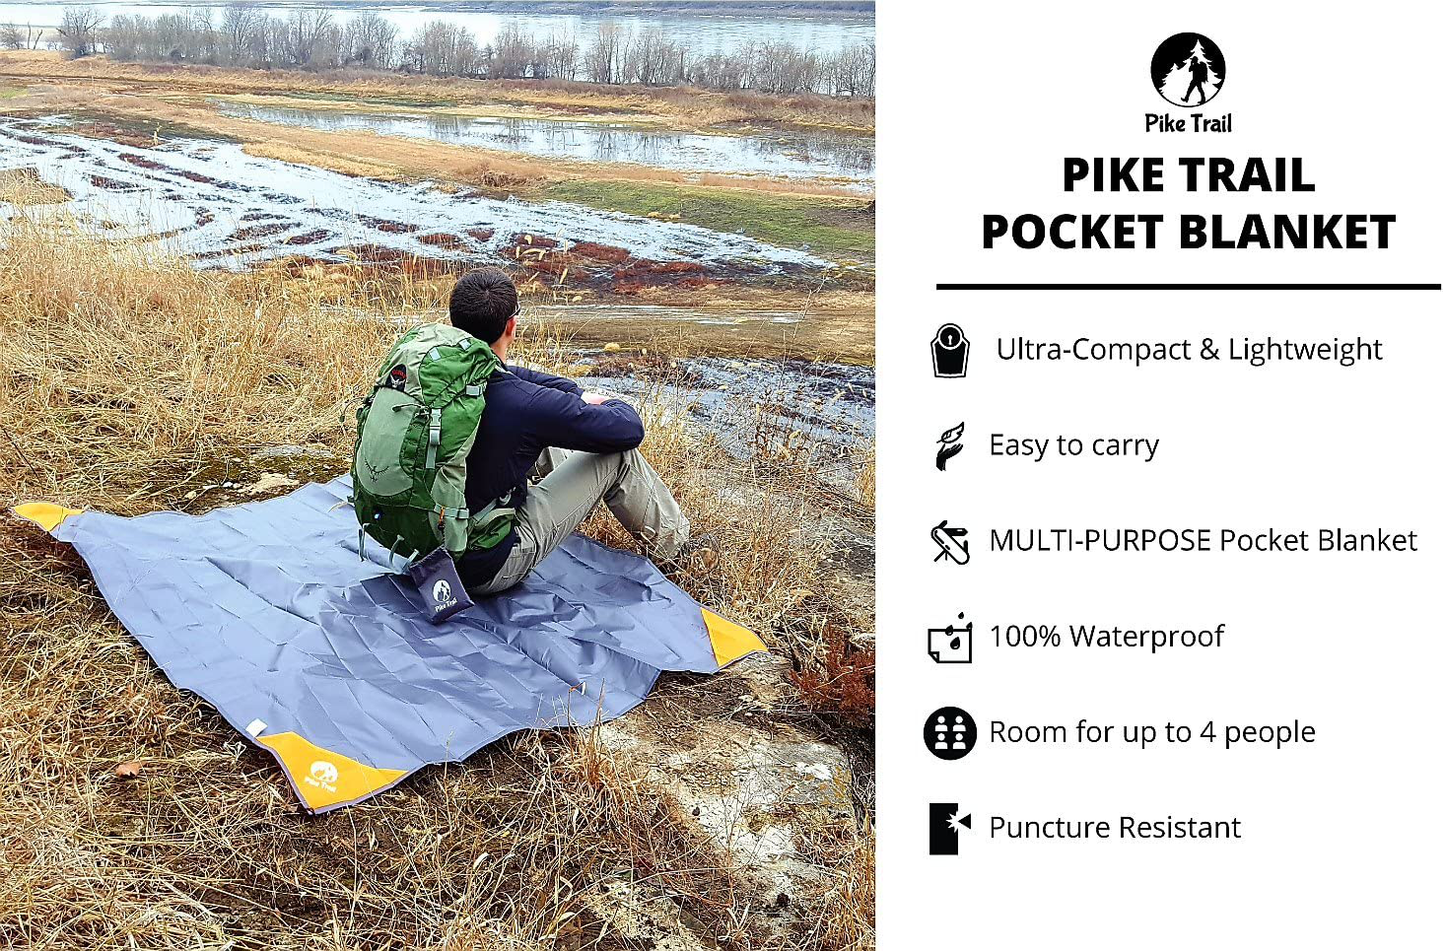 Pocket Blanket -Compact Picnic Blanket (60"X 56") - Sand Proof Beach Blanket / 100% Waterproof Ground Cover. Great Outdoor Blanket for Hiking, Camping, Picnics, Travel and Beach Trips!